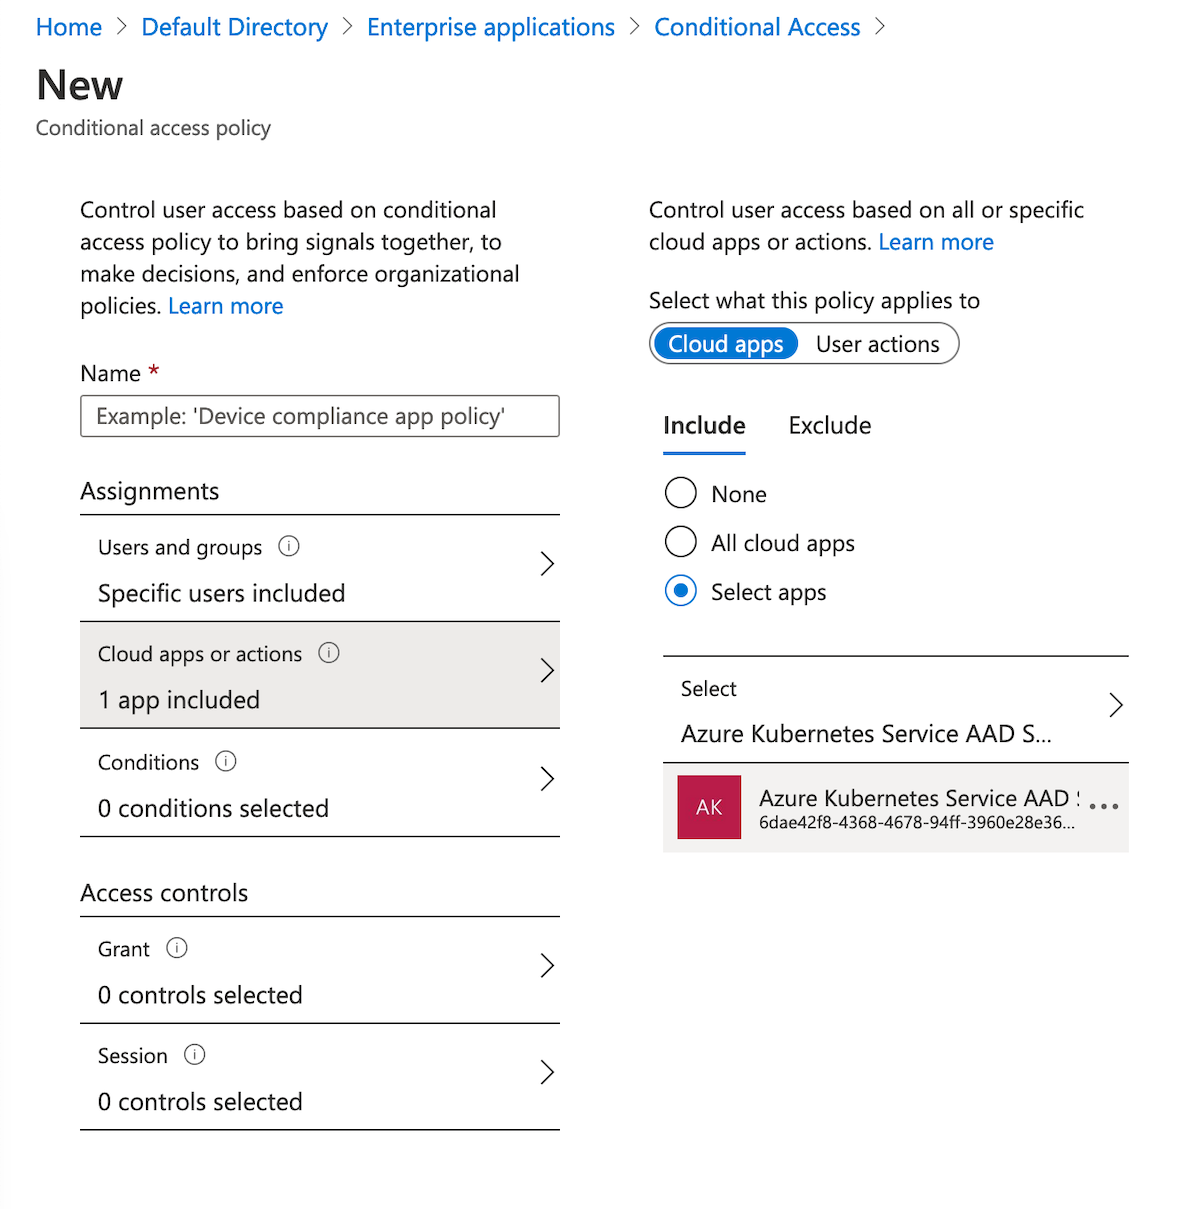 Selecting Azure Kubernetes Service AD Server for applying the Conditional Access policy